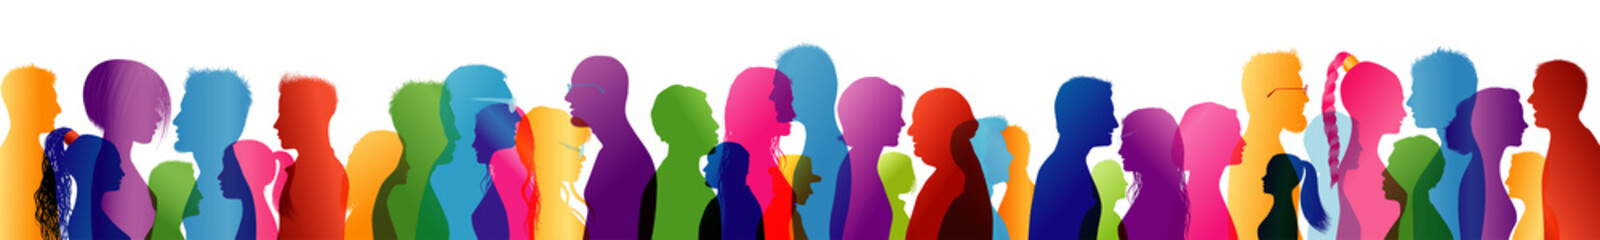 Crowd talking. Group of people talking. Colored silhouette profiles. Speak. To communicate